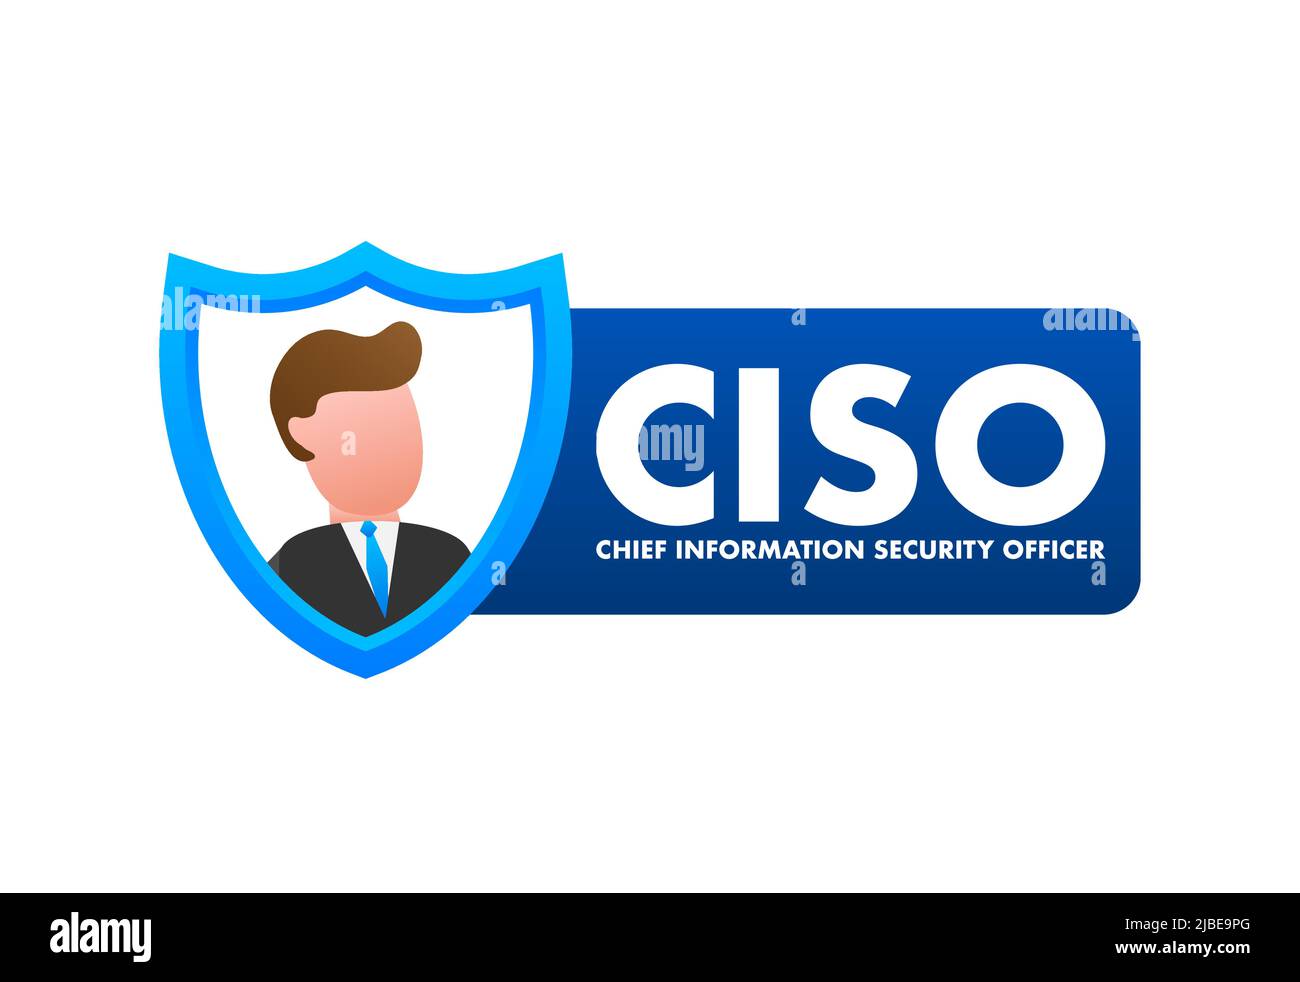 Business expert. Ciso chief information security officer , letters and icons. Vector illustration Stock Vector